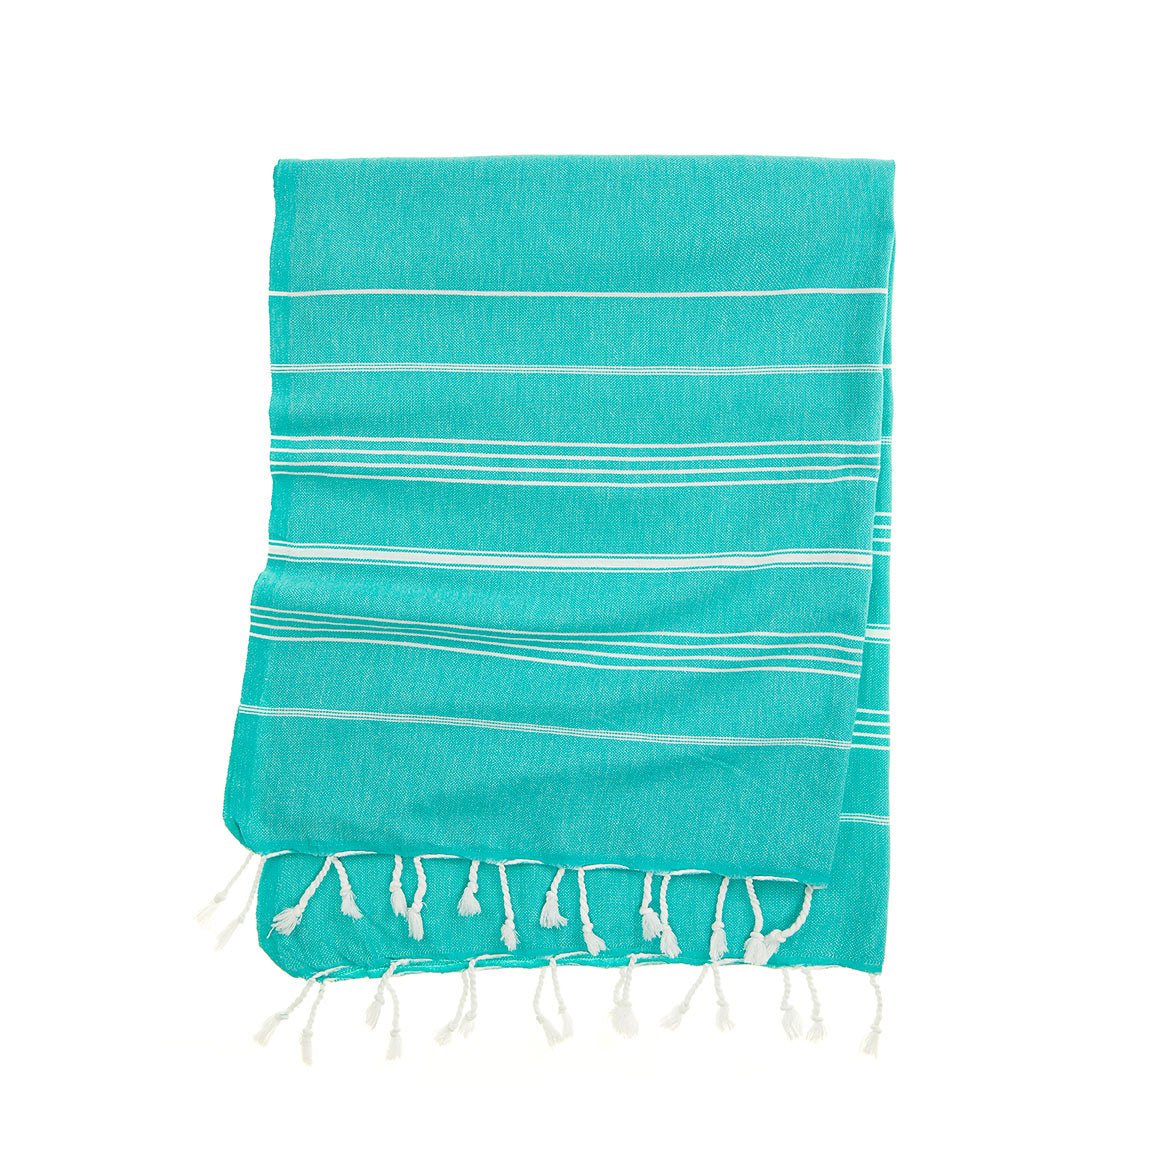 Essential Blanket - The Riviera Towel Company